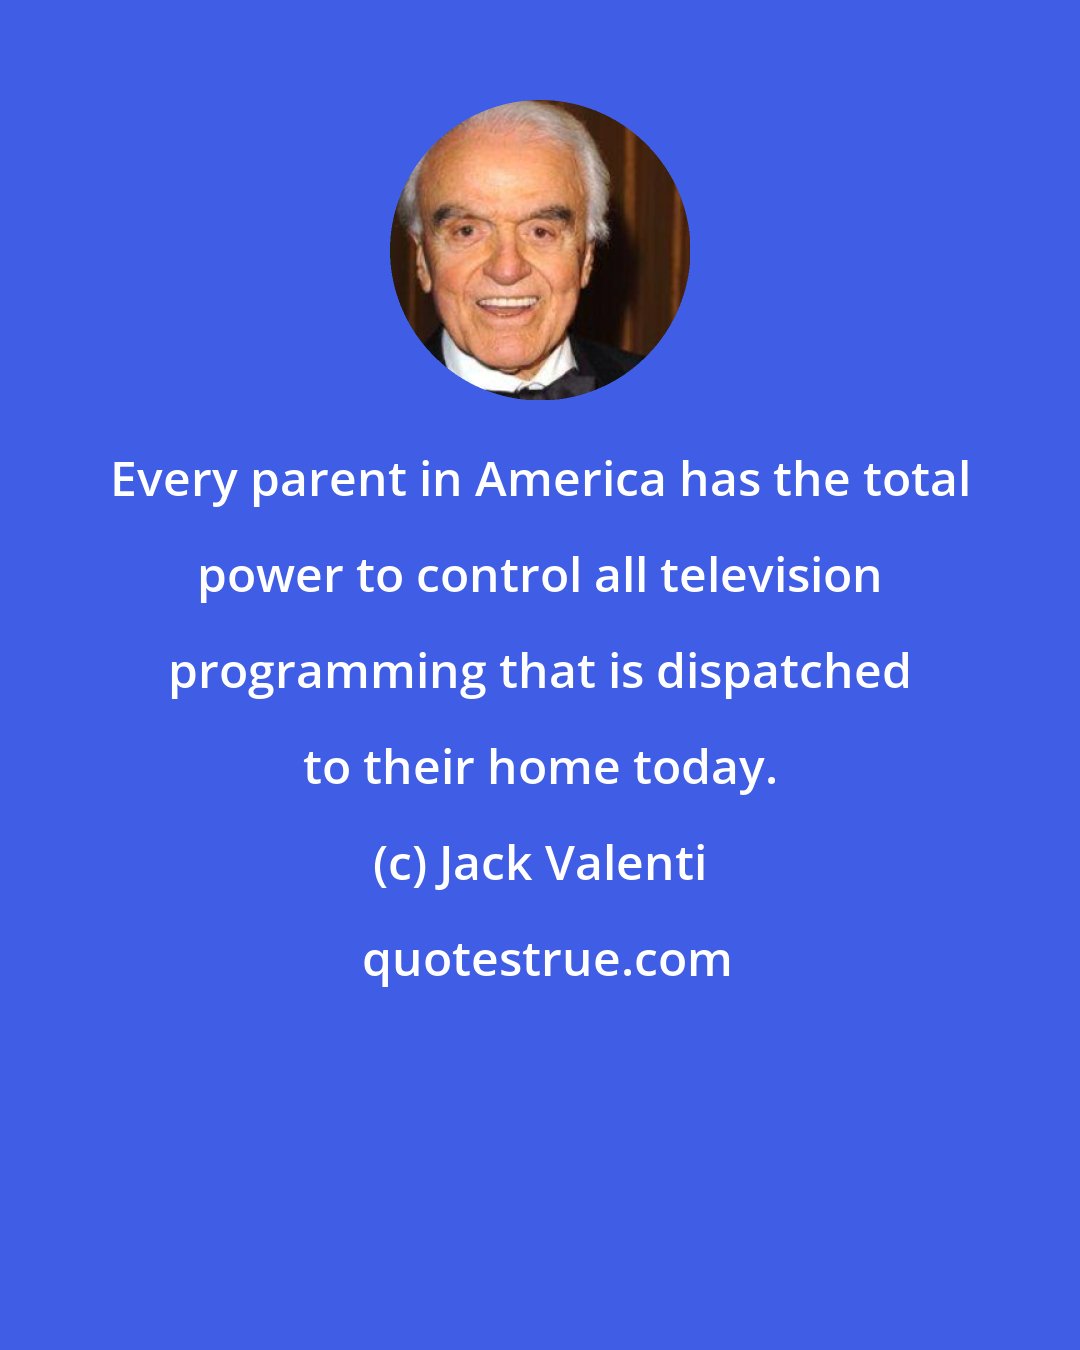 Jack Valenti: Every parent in America has the total power to control all television programming that is dispatched to their home today.